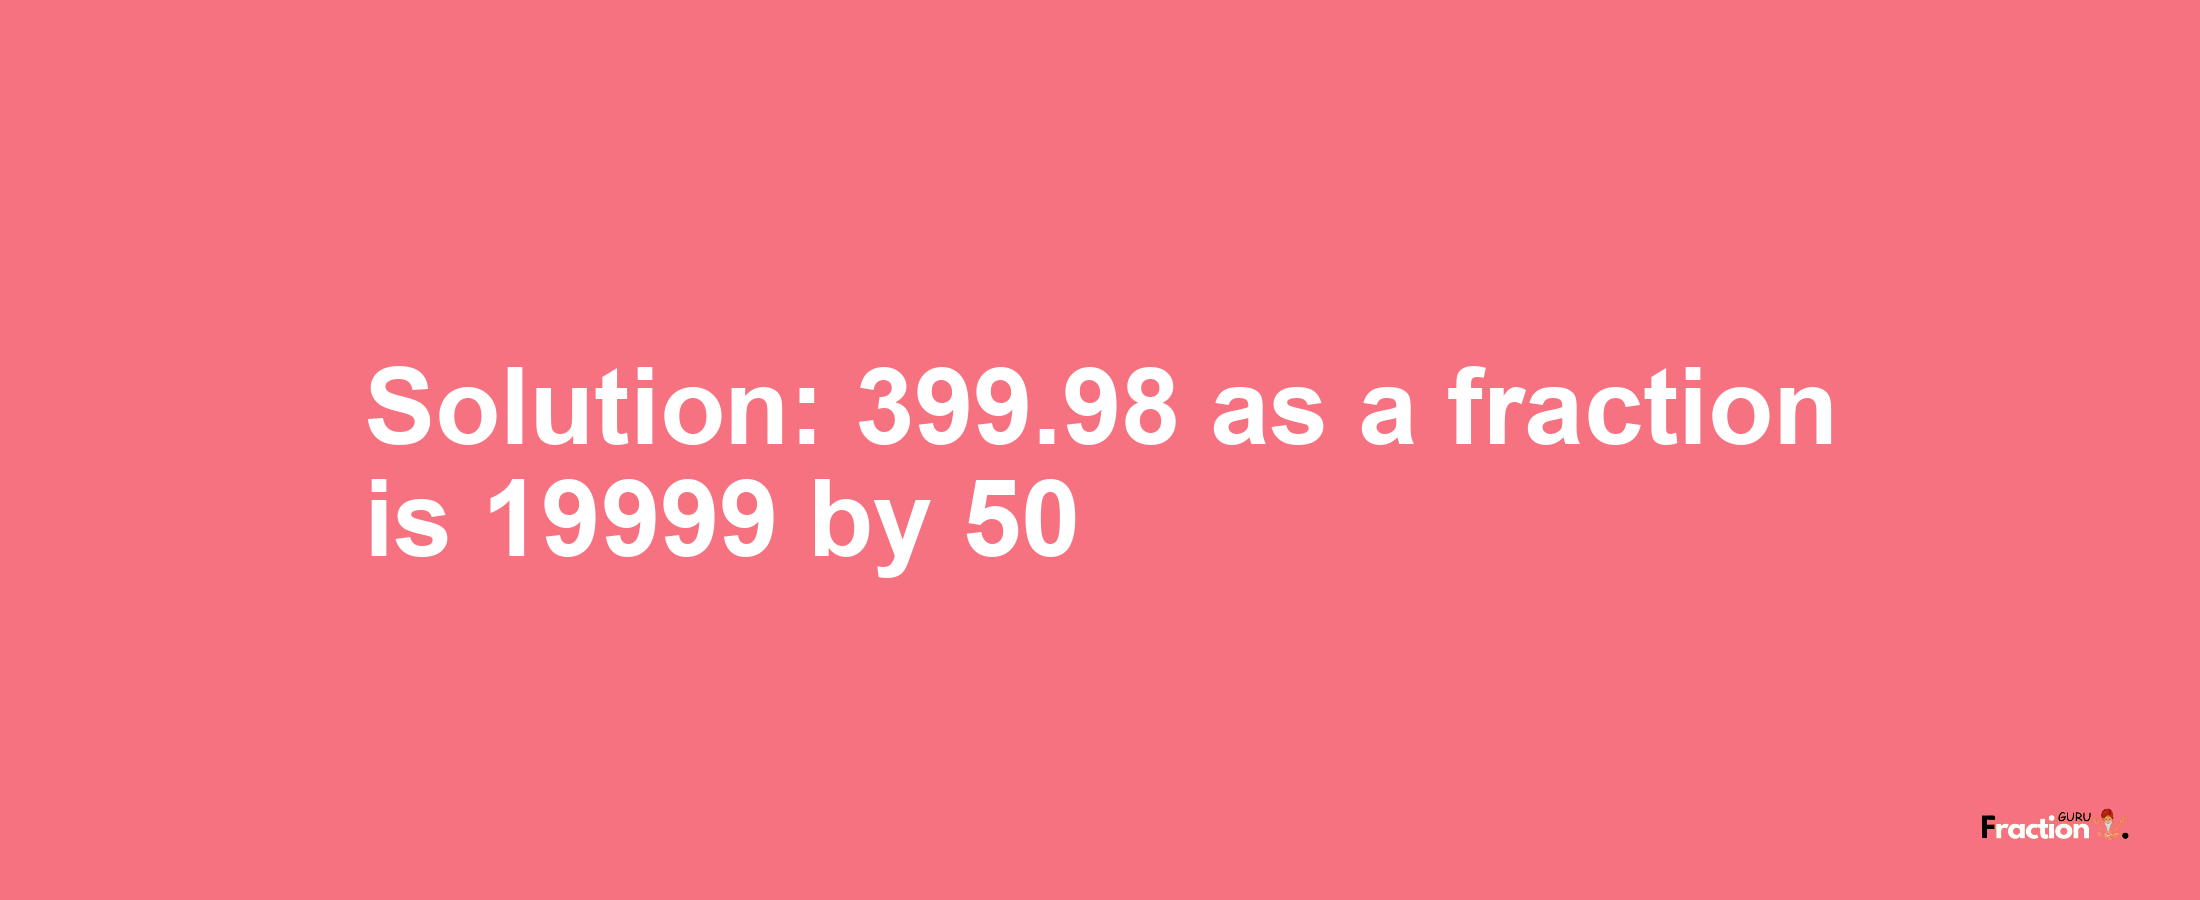 Solution:399.98 as a fraction is 19999/50